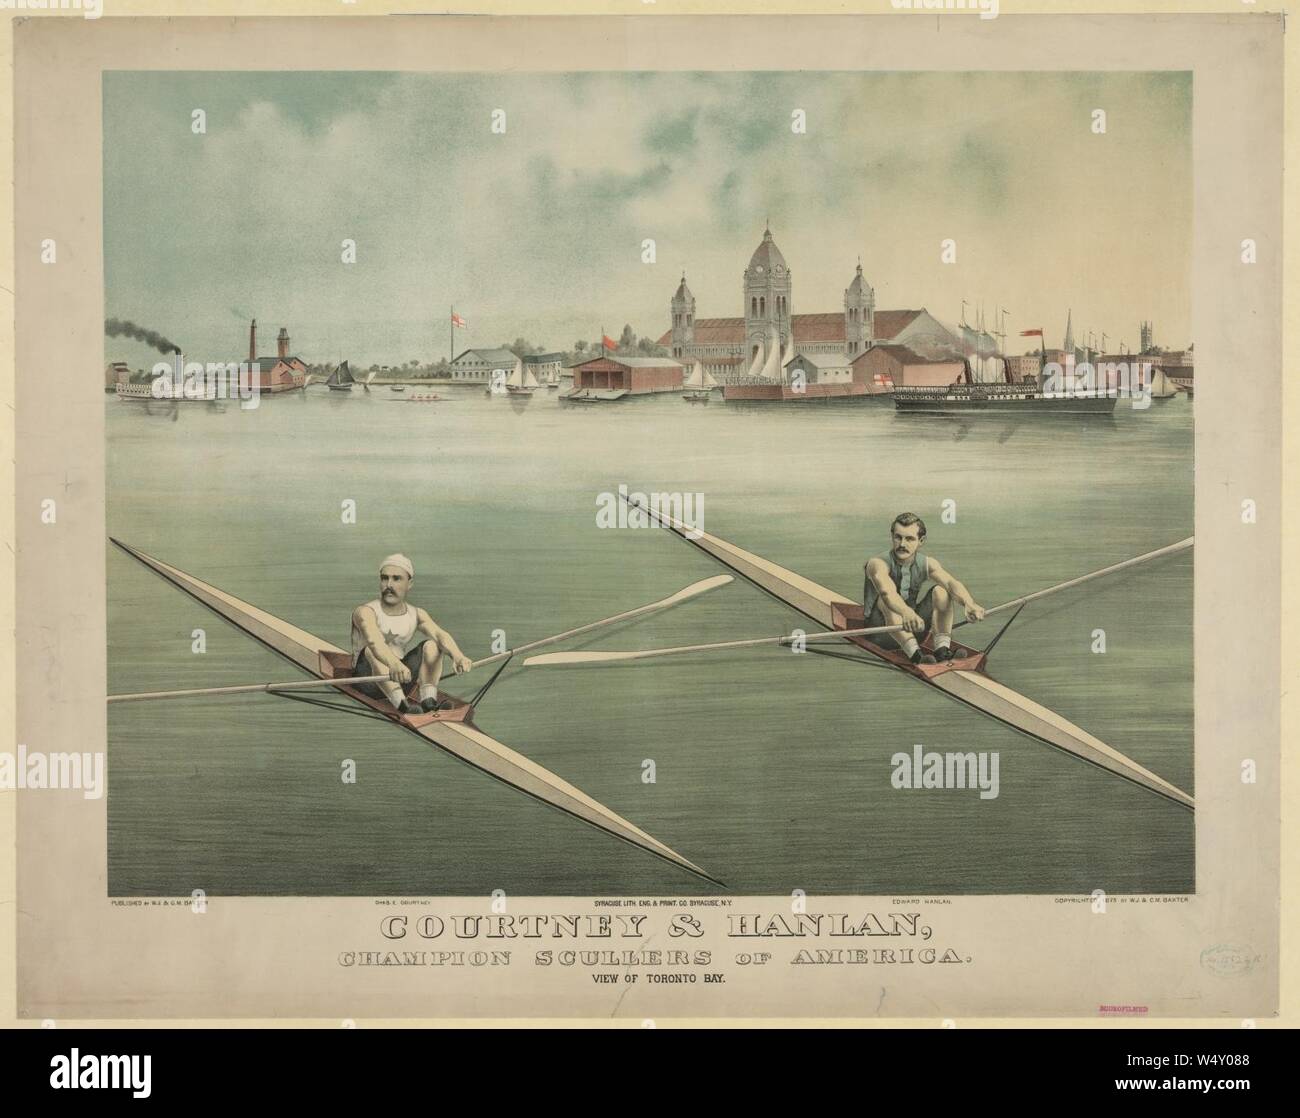 Courtney & Hanlan, champion scullers of America - view of Toronto Bay - Syracuse Lith. Eng. & Print. Co, Syracuse, N.Y. Stock Photo